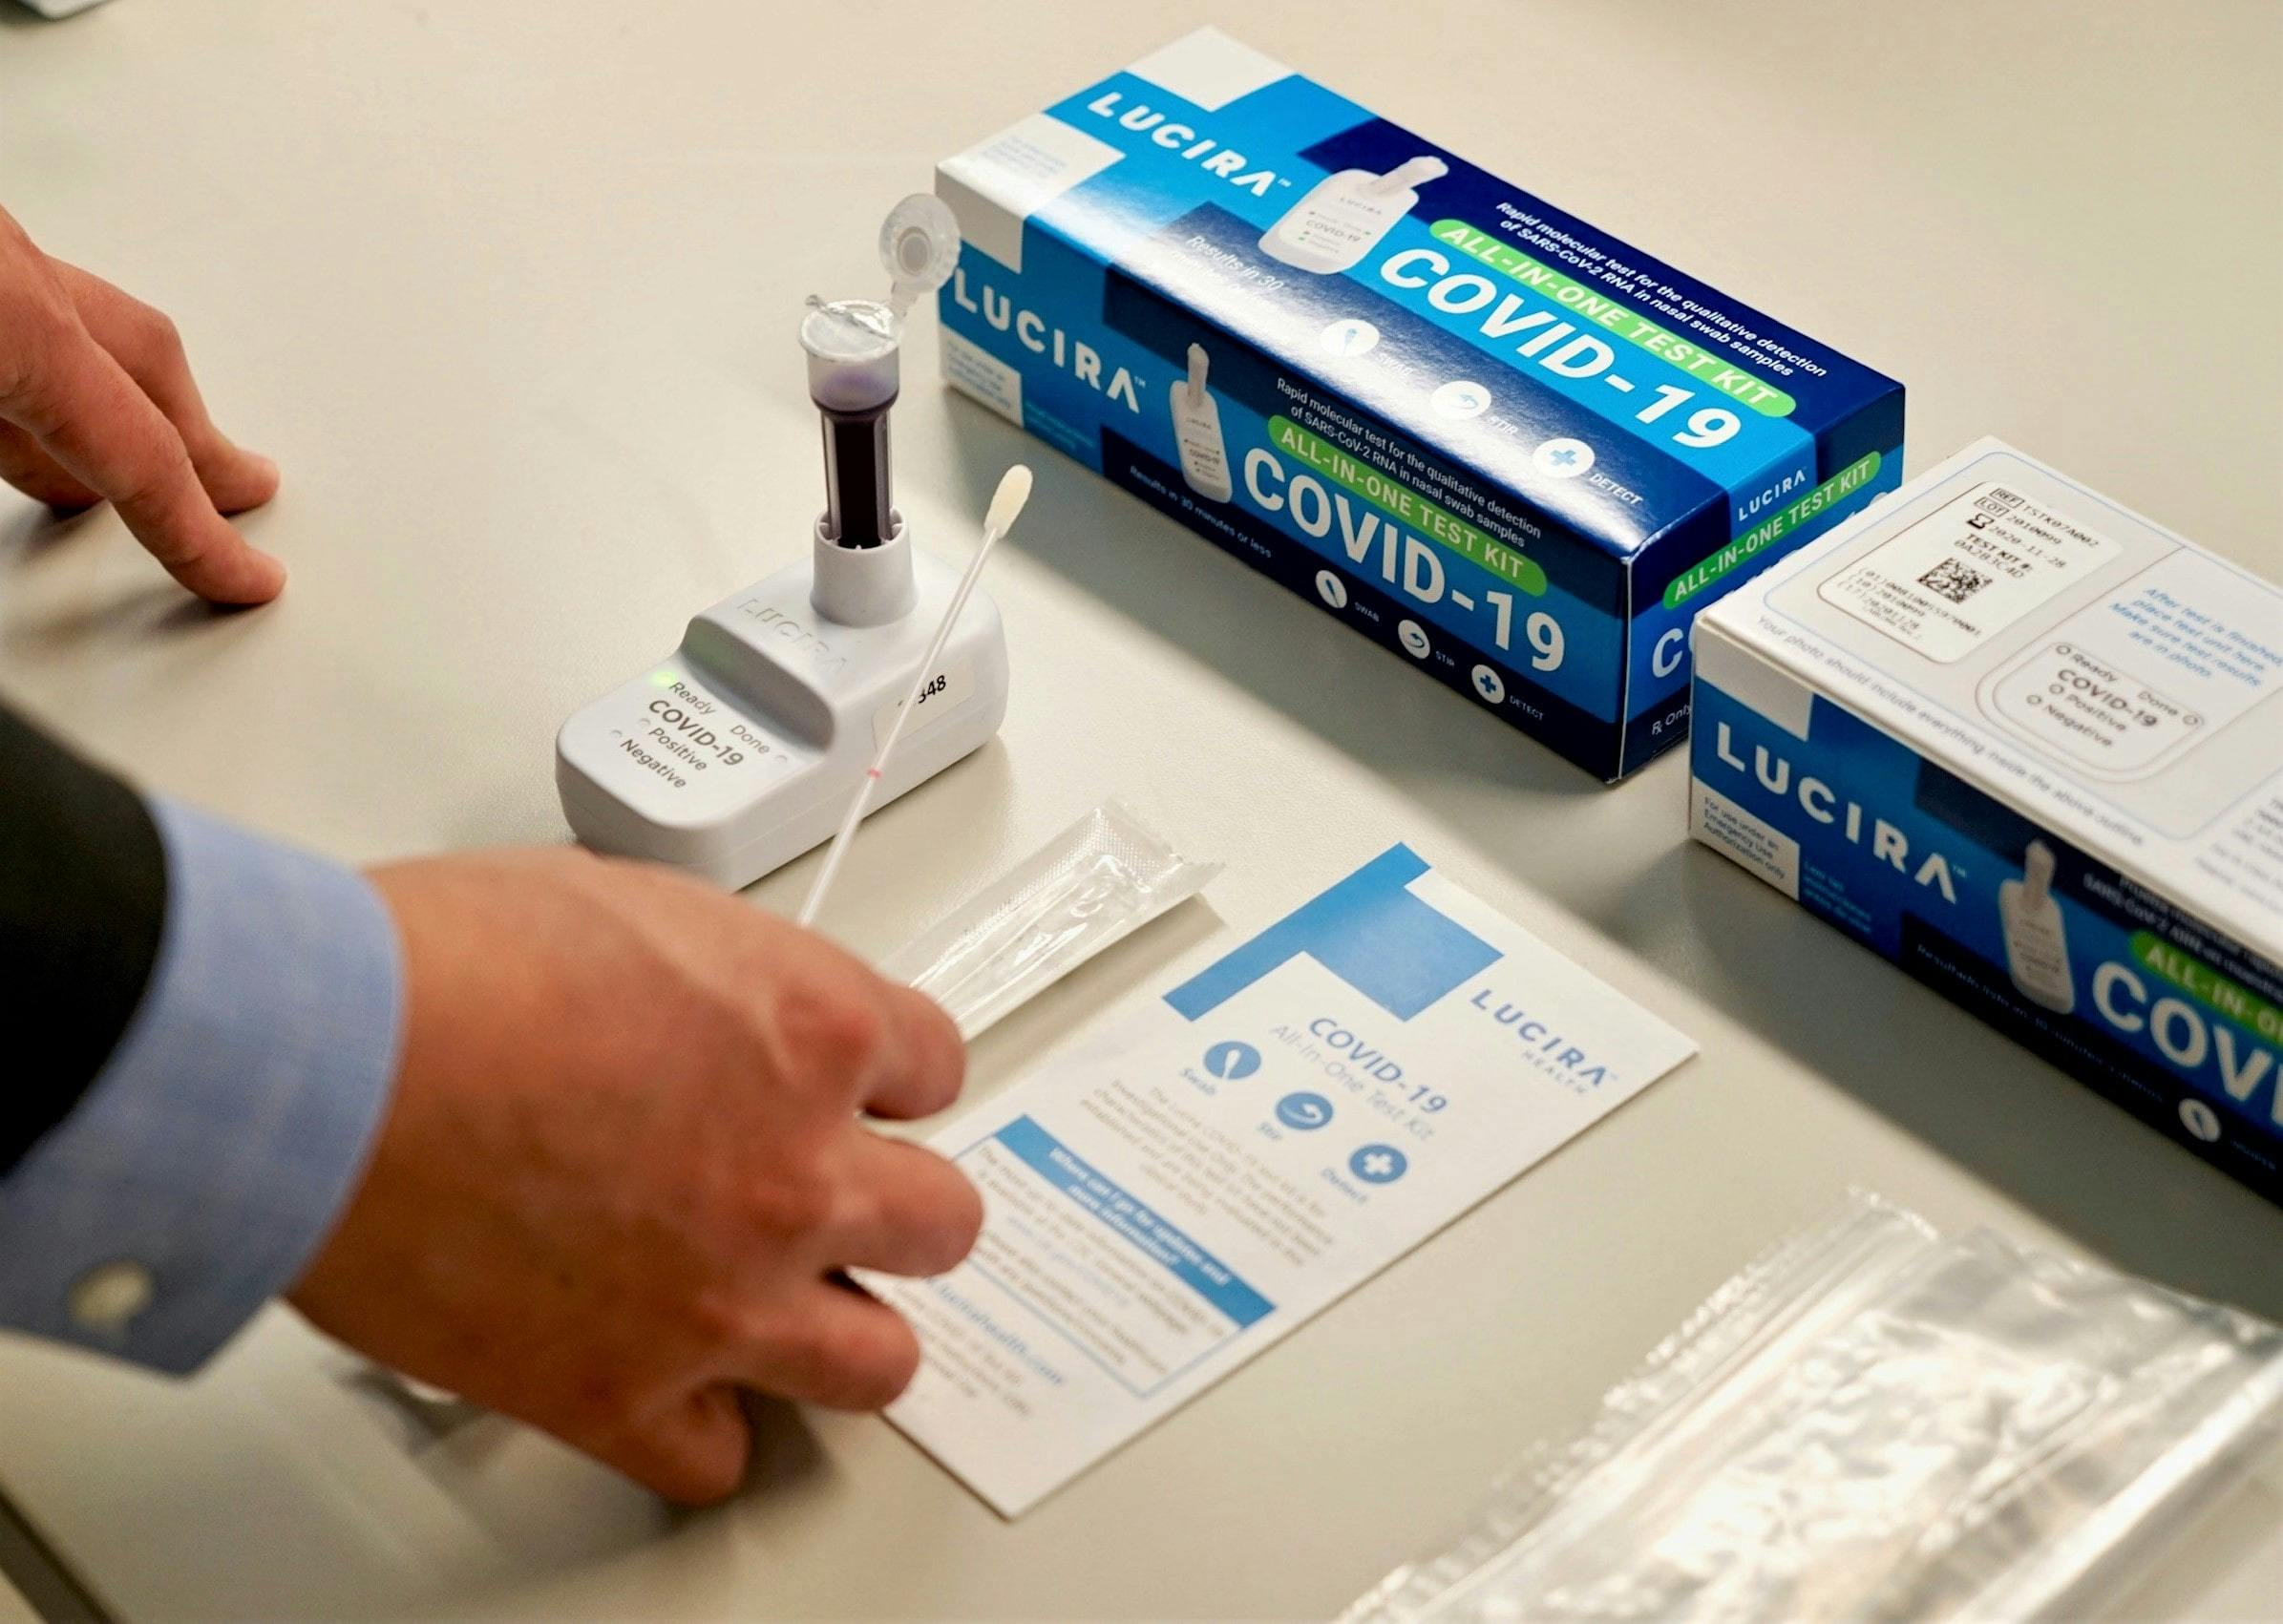 COVID Test Review: Lucira Check-It At Home Molecular Test